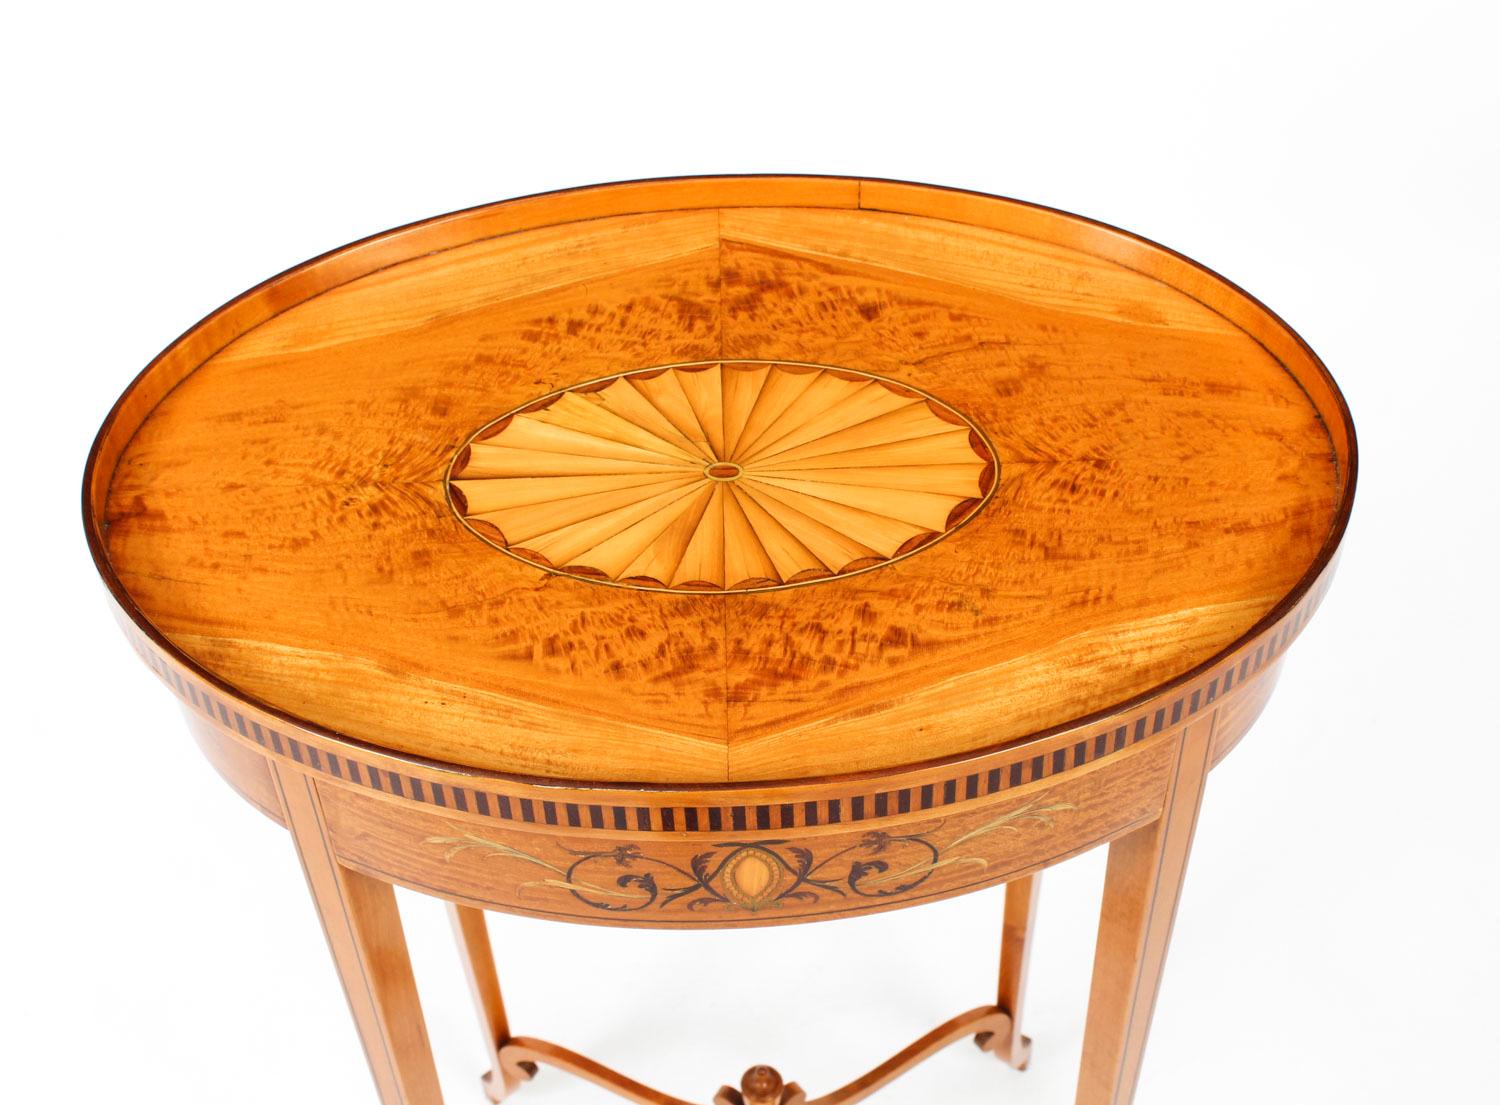 English Antique Marquetry & Shell Inlaid Satinwood Oval Occasional Table, 19th Century